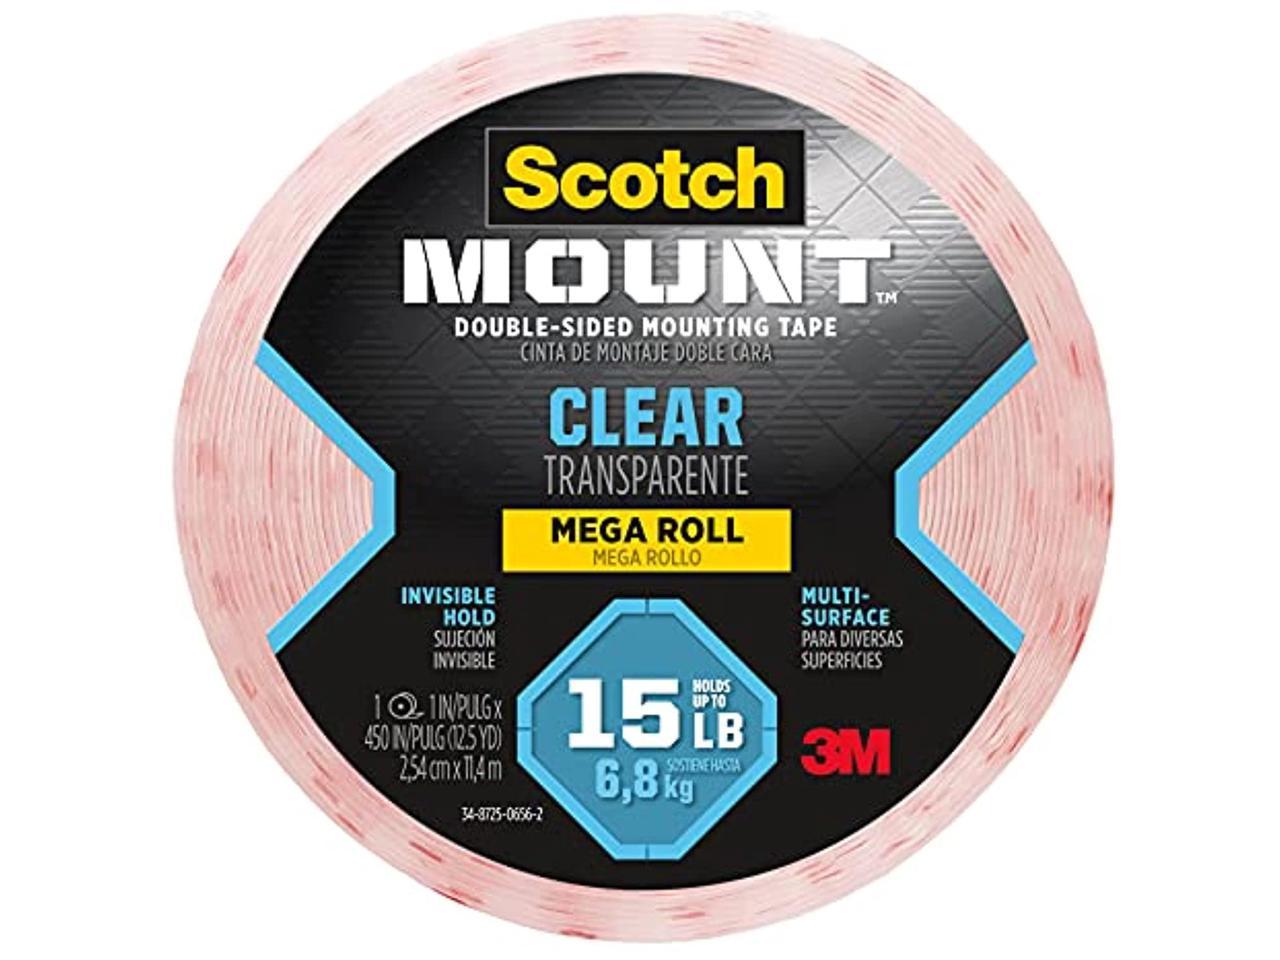 White 1 Pack 1 in x 125 in Scotch Brand 112L Permanent Mounting Tape 